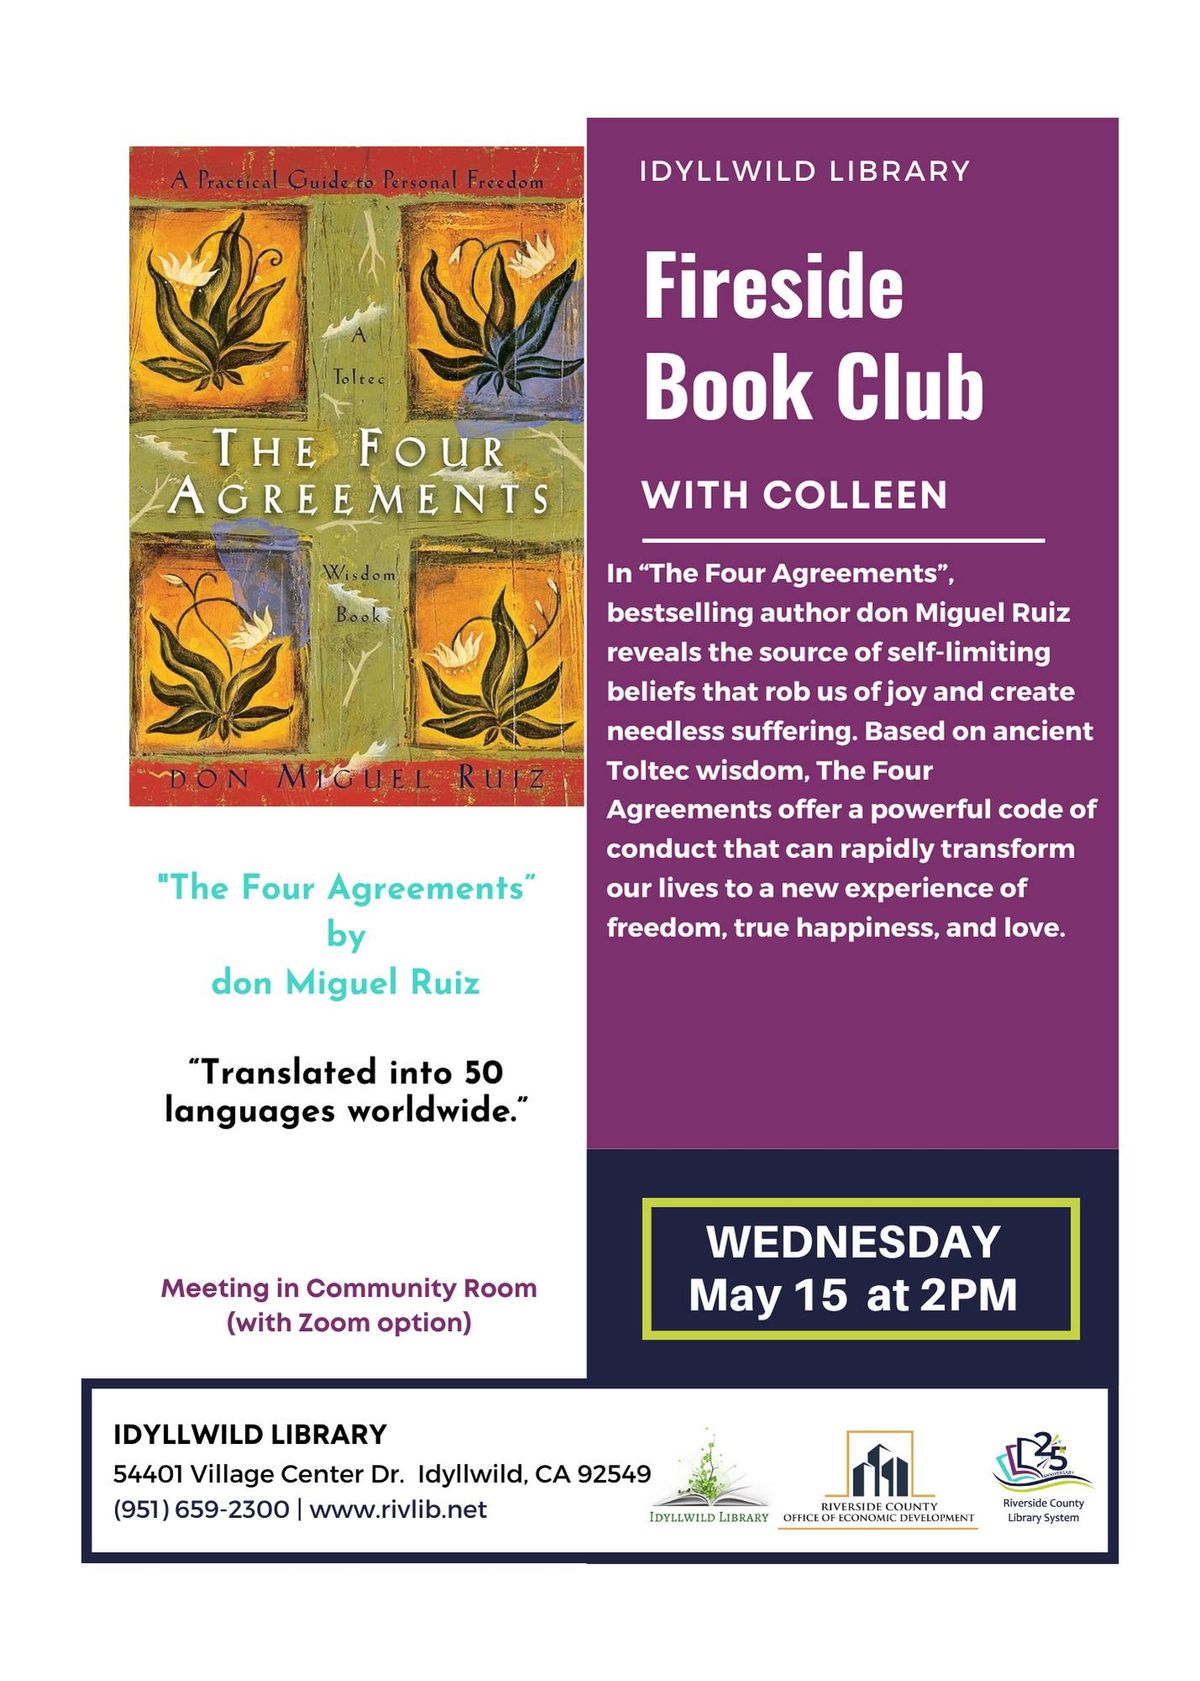 Fireside Book Group:  "The Four Agreements" by don Miguel Ruiz